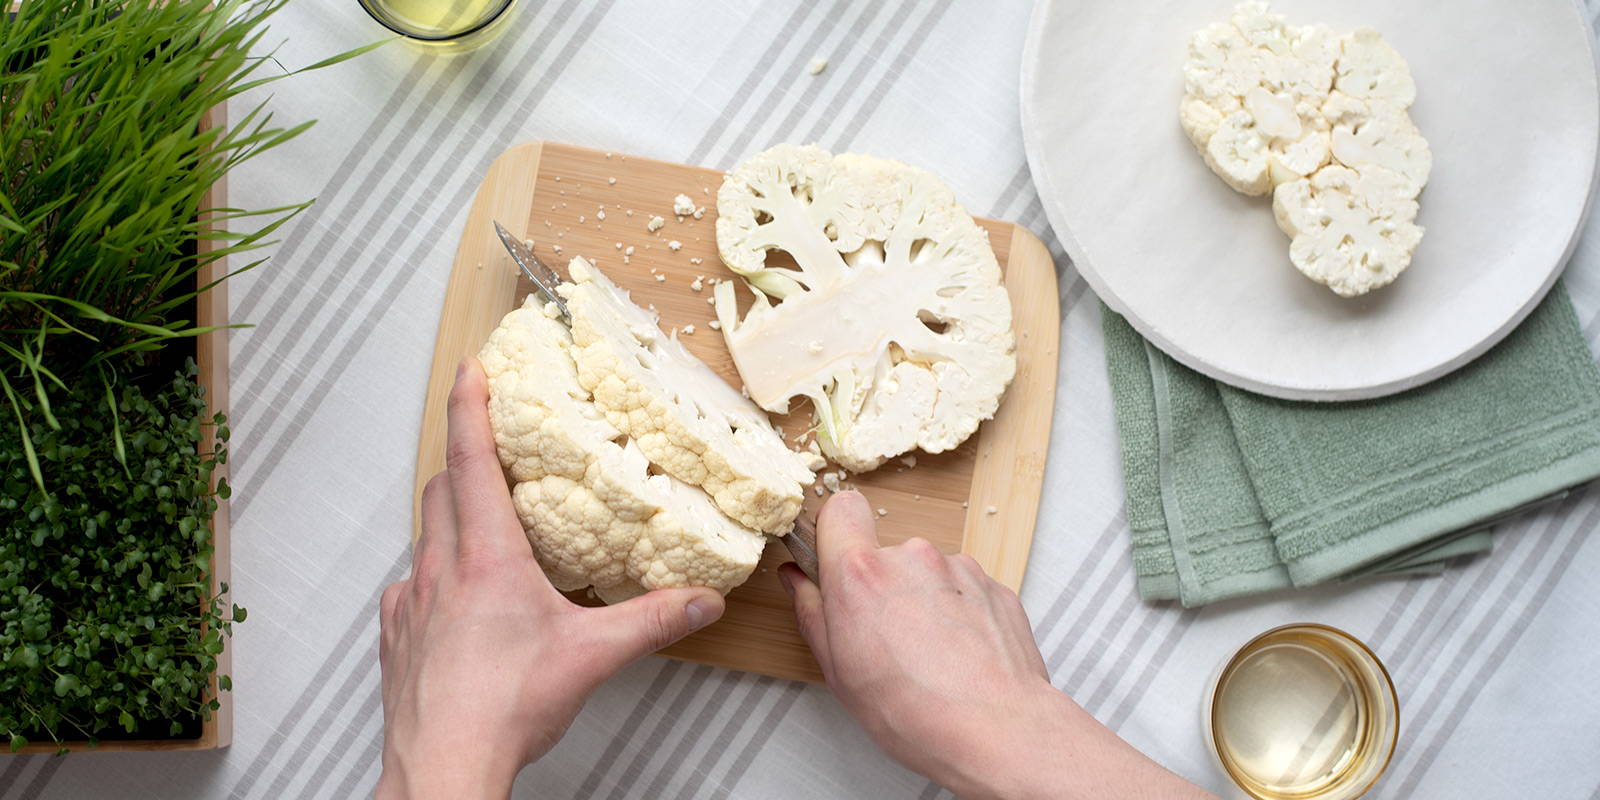 A head of raw cauliflower being sliced into thick grillable-slices